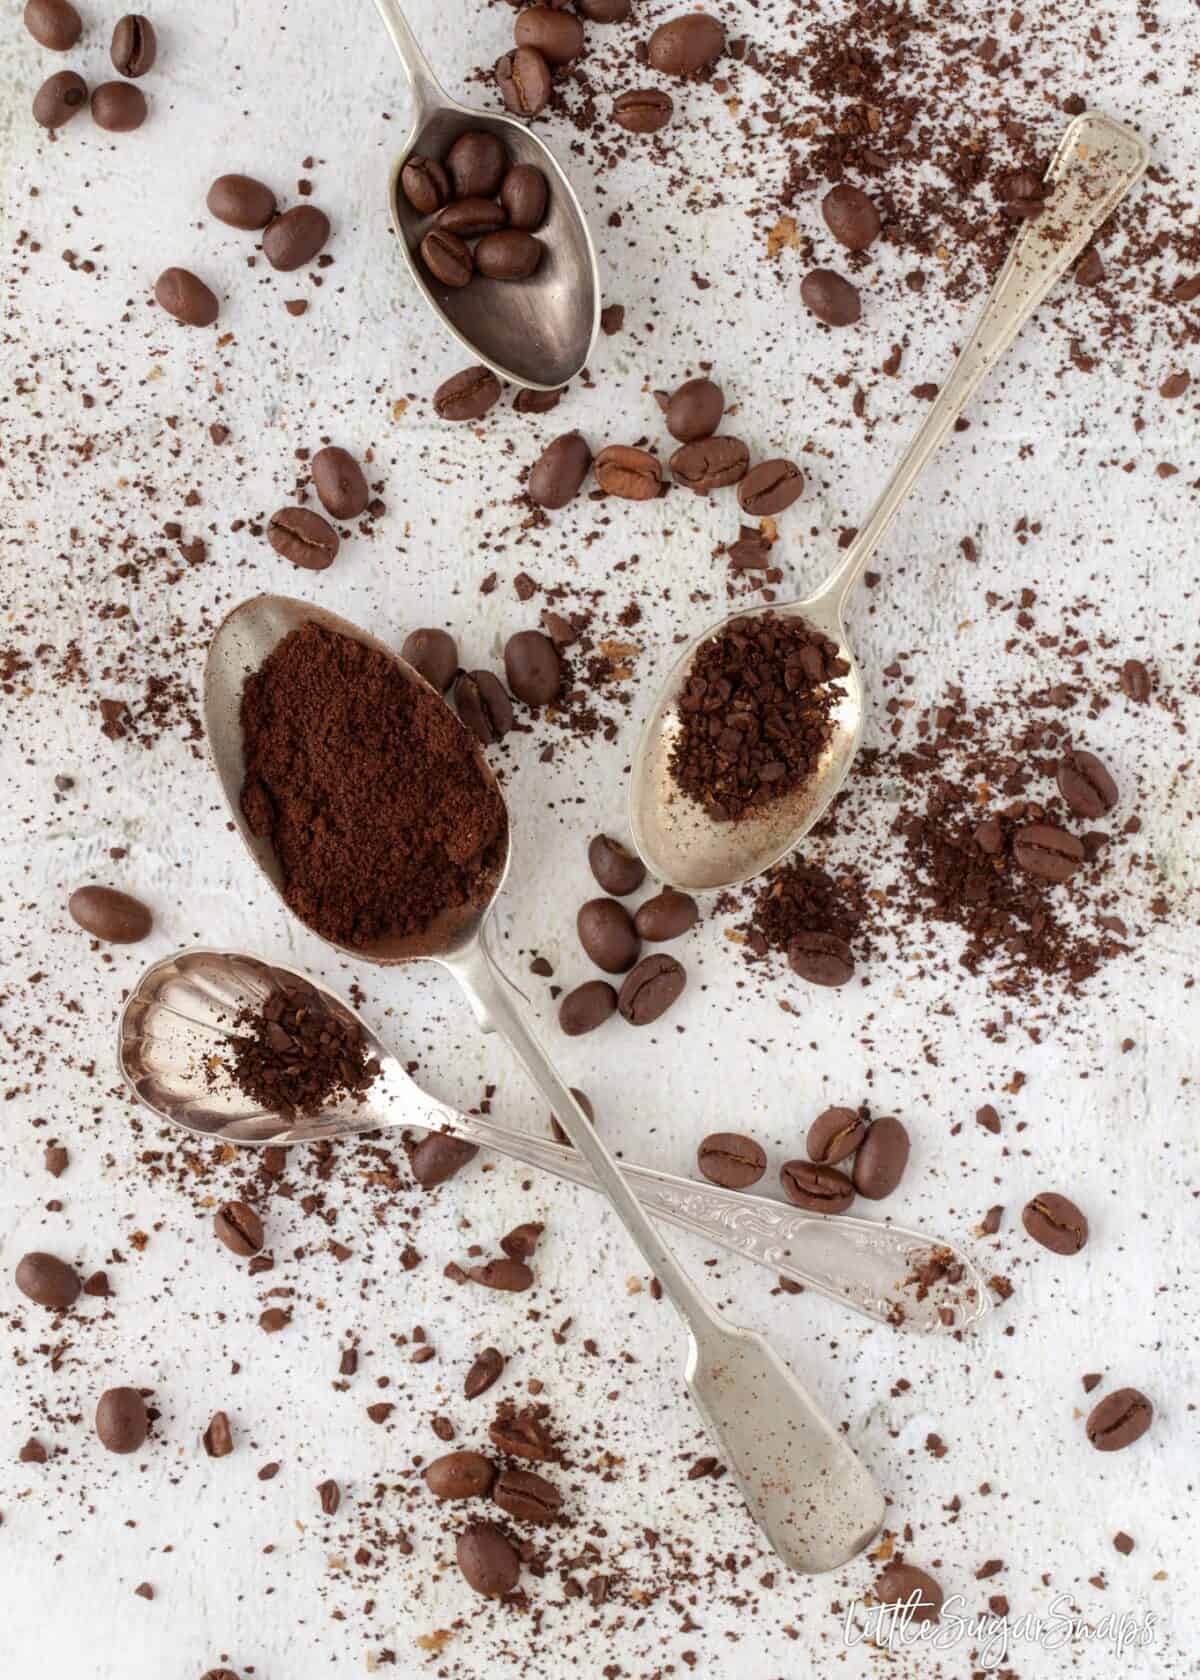 Coffee beans and ground coffee on old spoons.